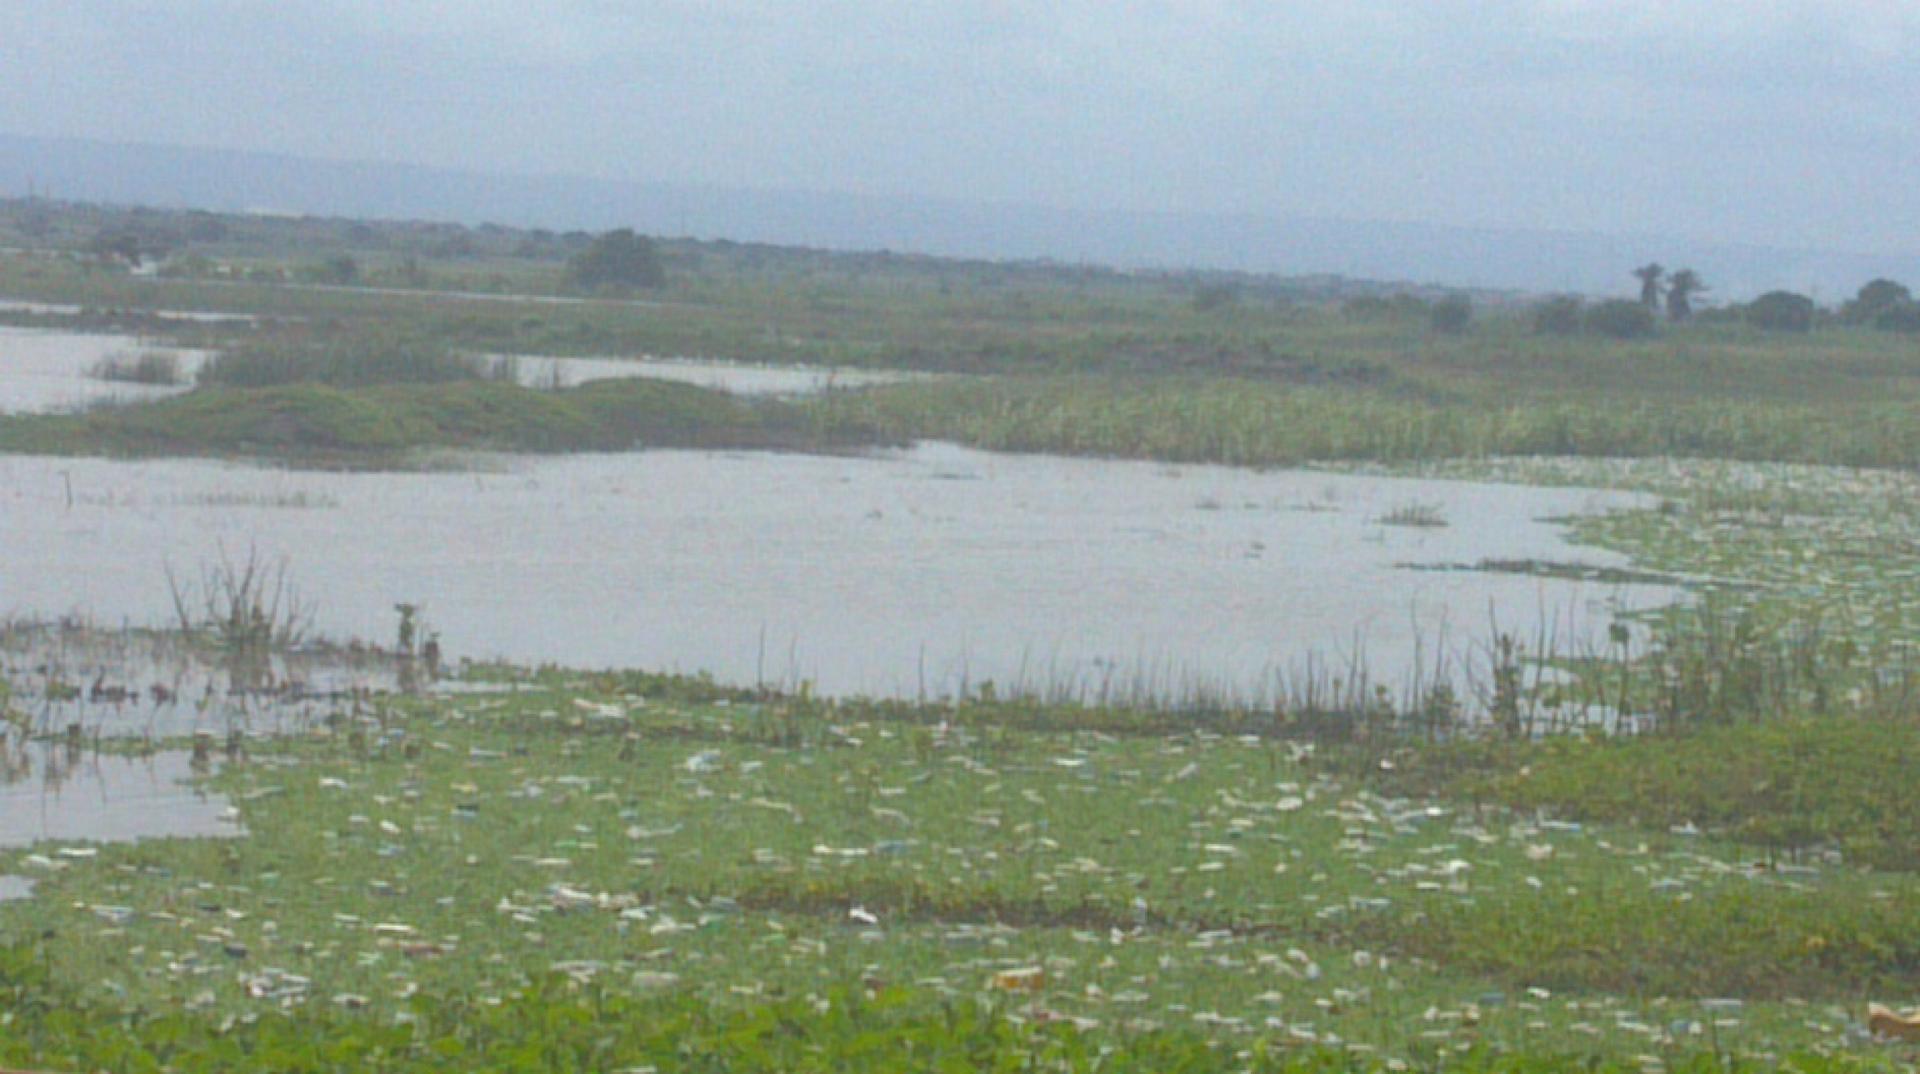 View of a part of the Sakumono lagoon and wetlands in the Greater Accra region, June 8, 2014. 